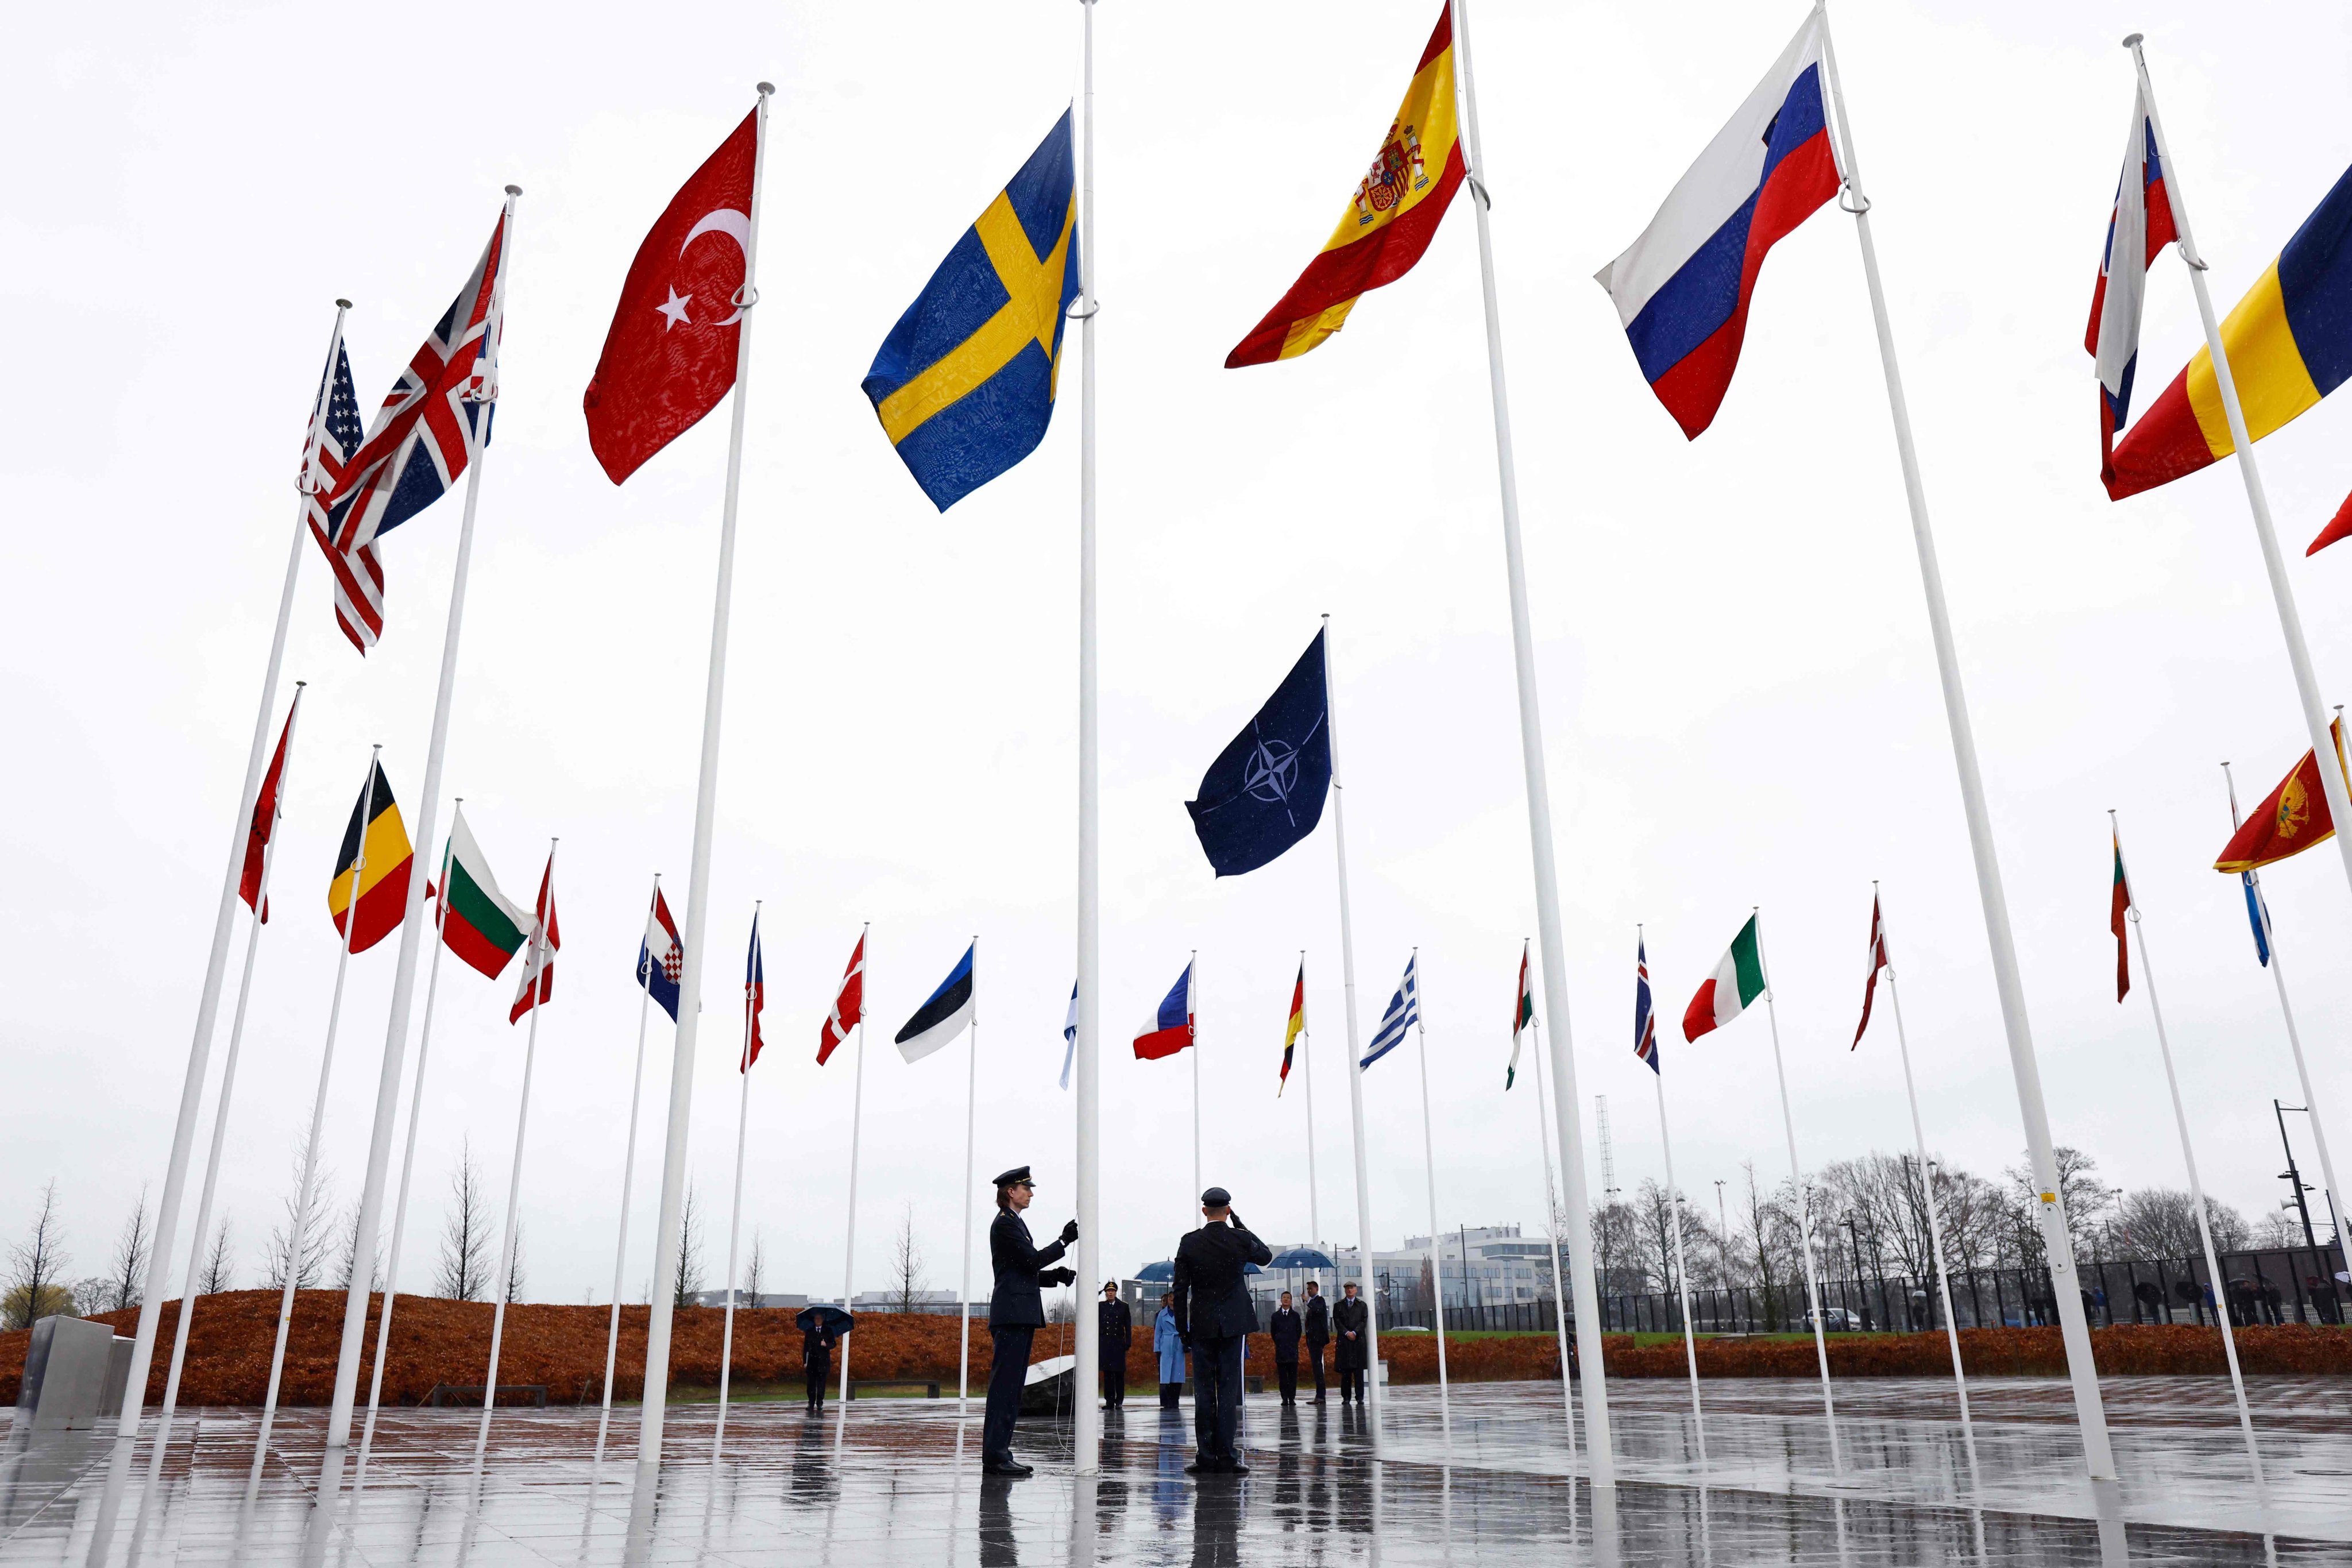 Officials hoist the Swedish national flag on a pole during a flag raising ceremony for Sweden’s accession to Nato at the alliance’s headquarters in Brussels. Photo: AFP